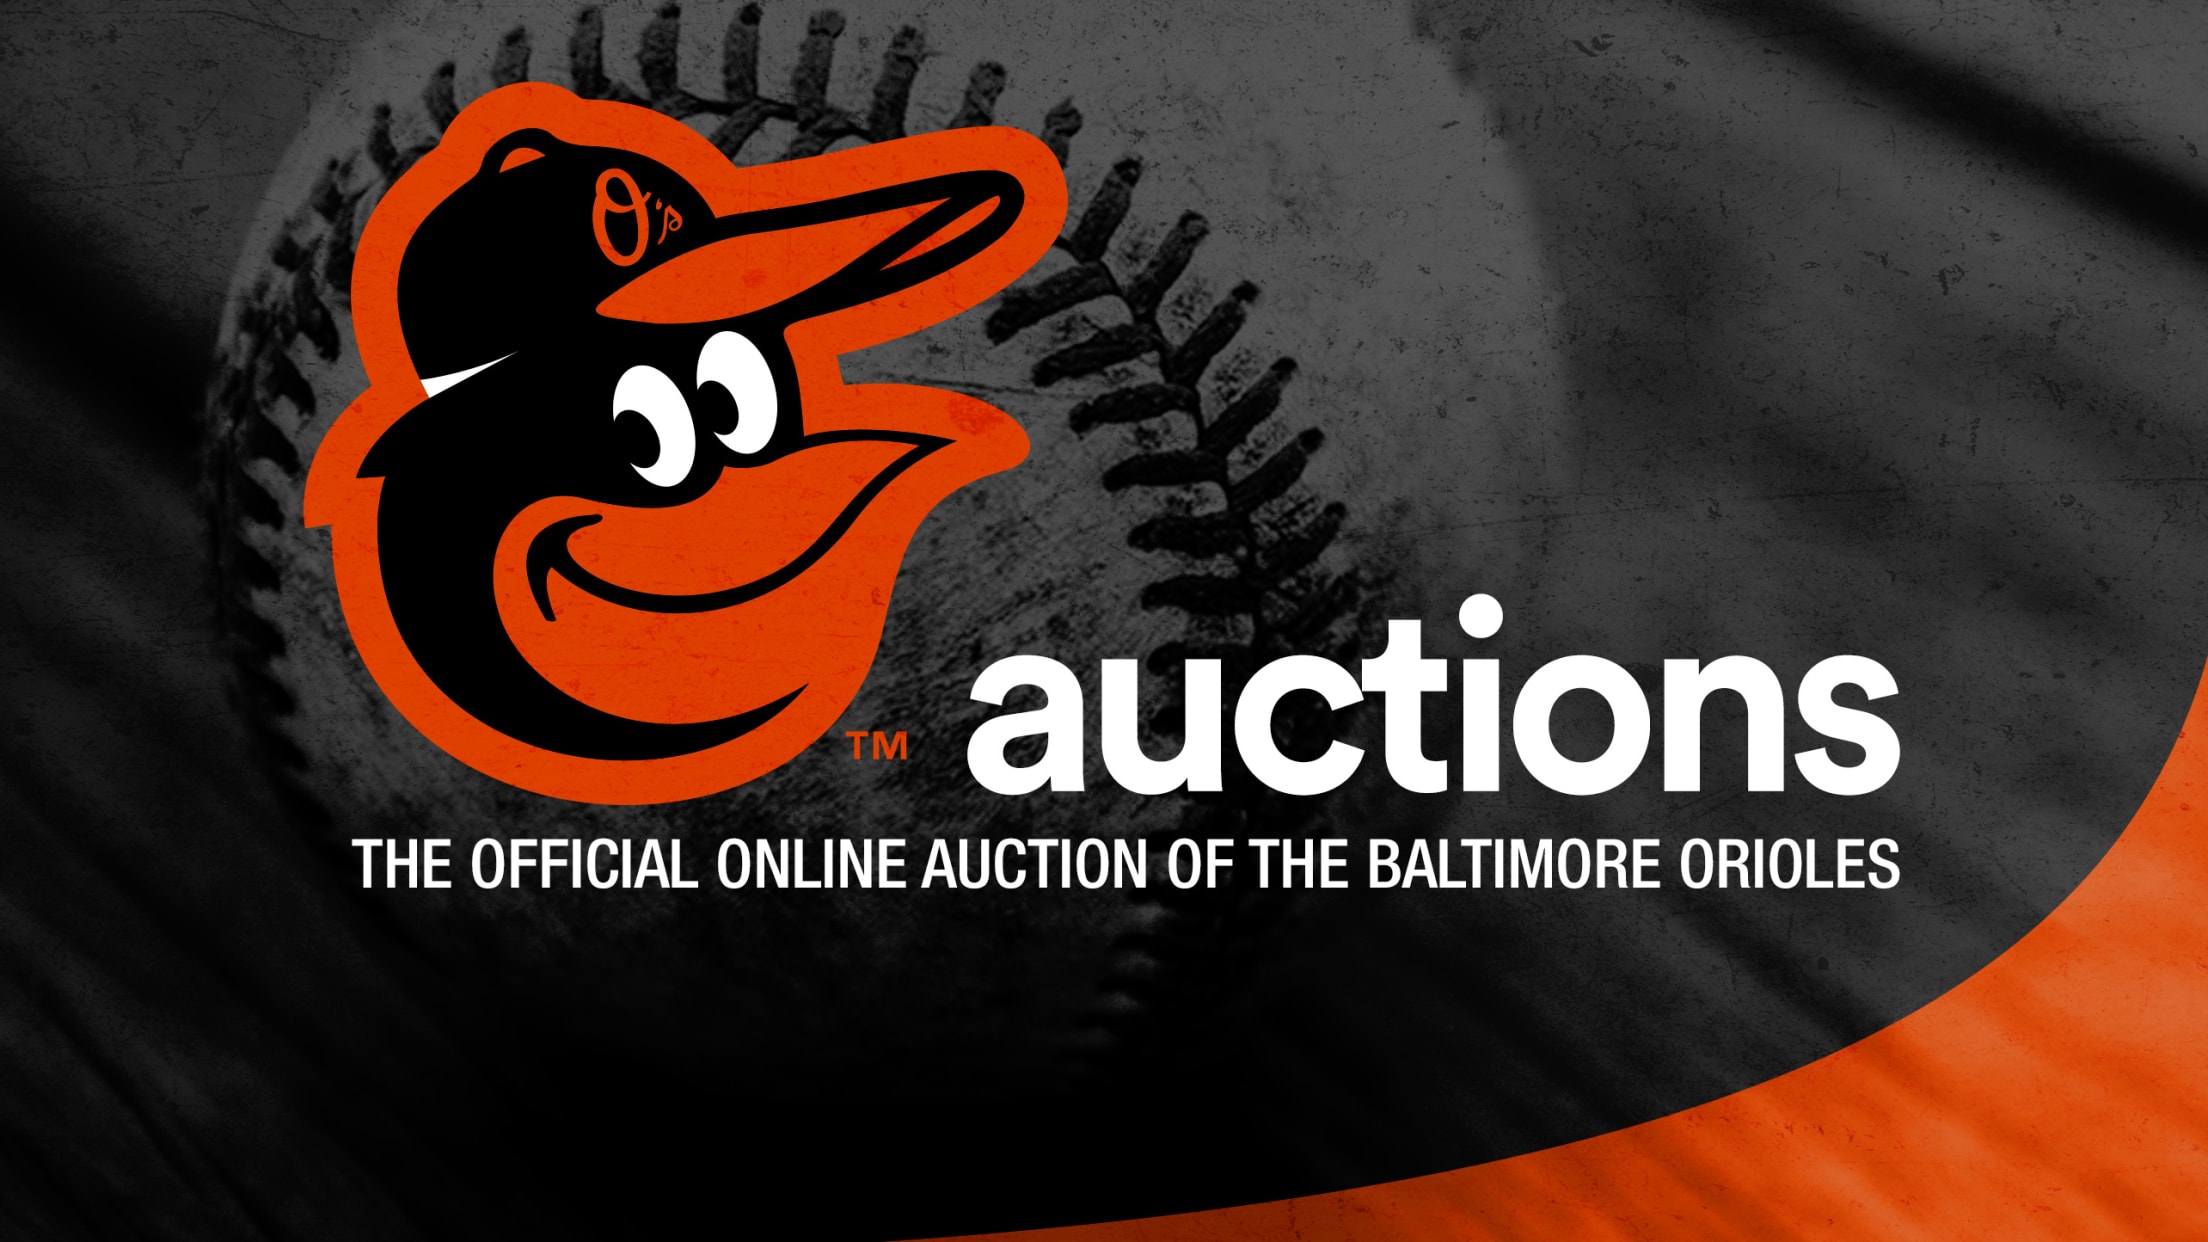 Fans line up for Orioles' City Connect jersey and merchandise